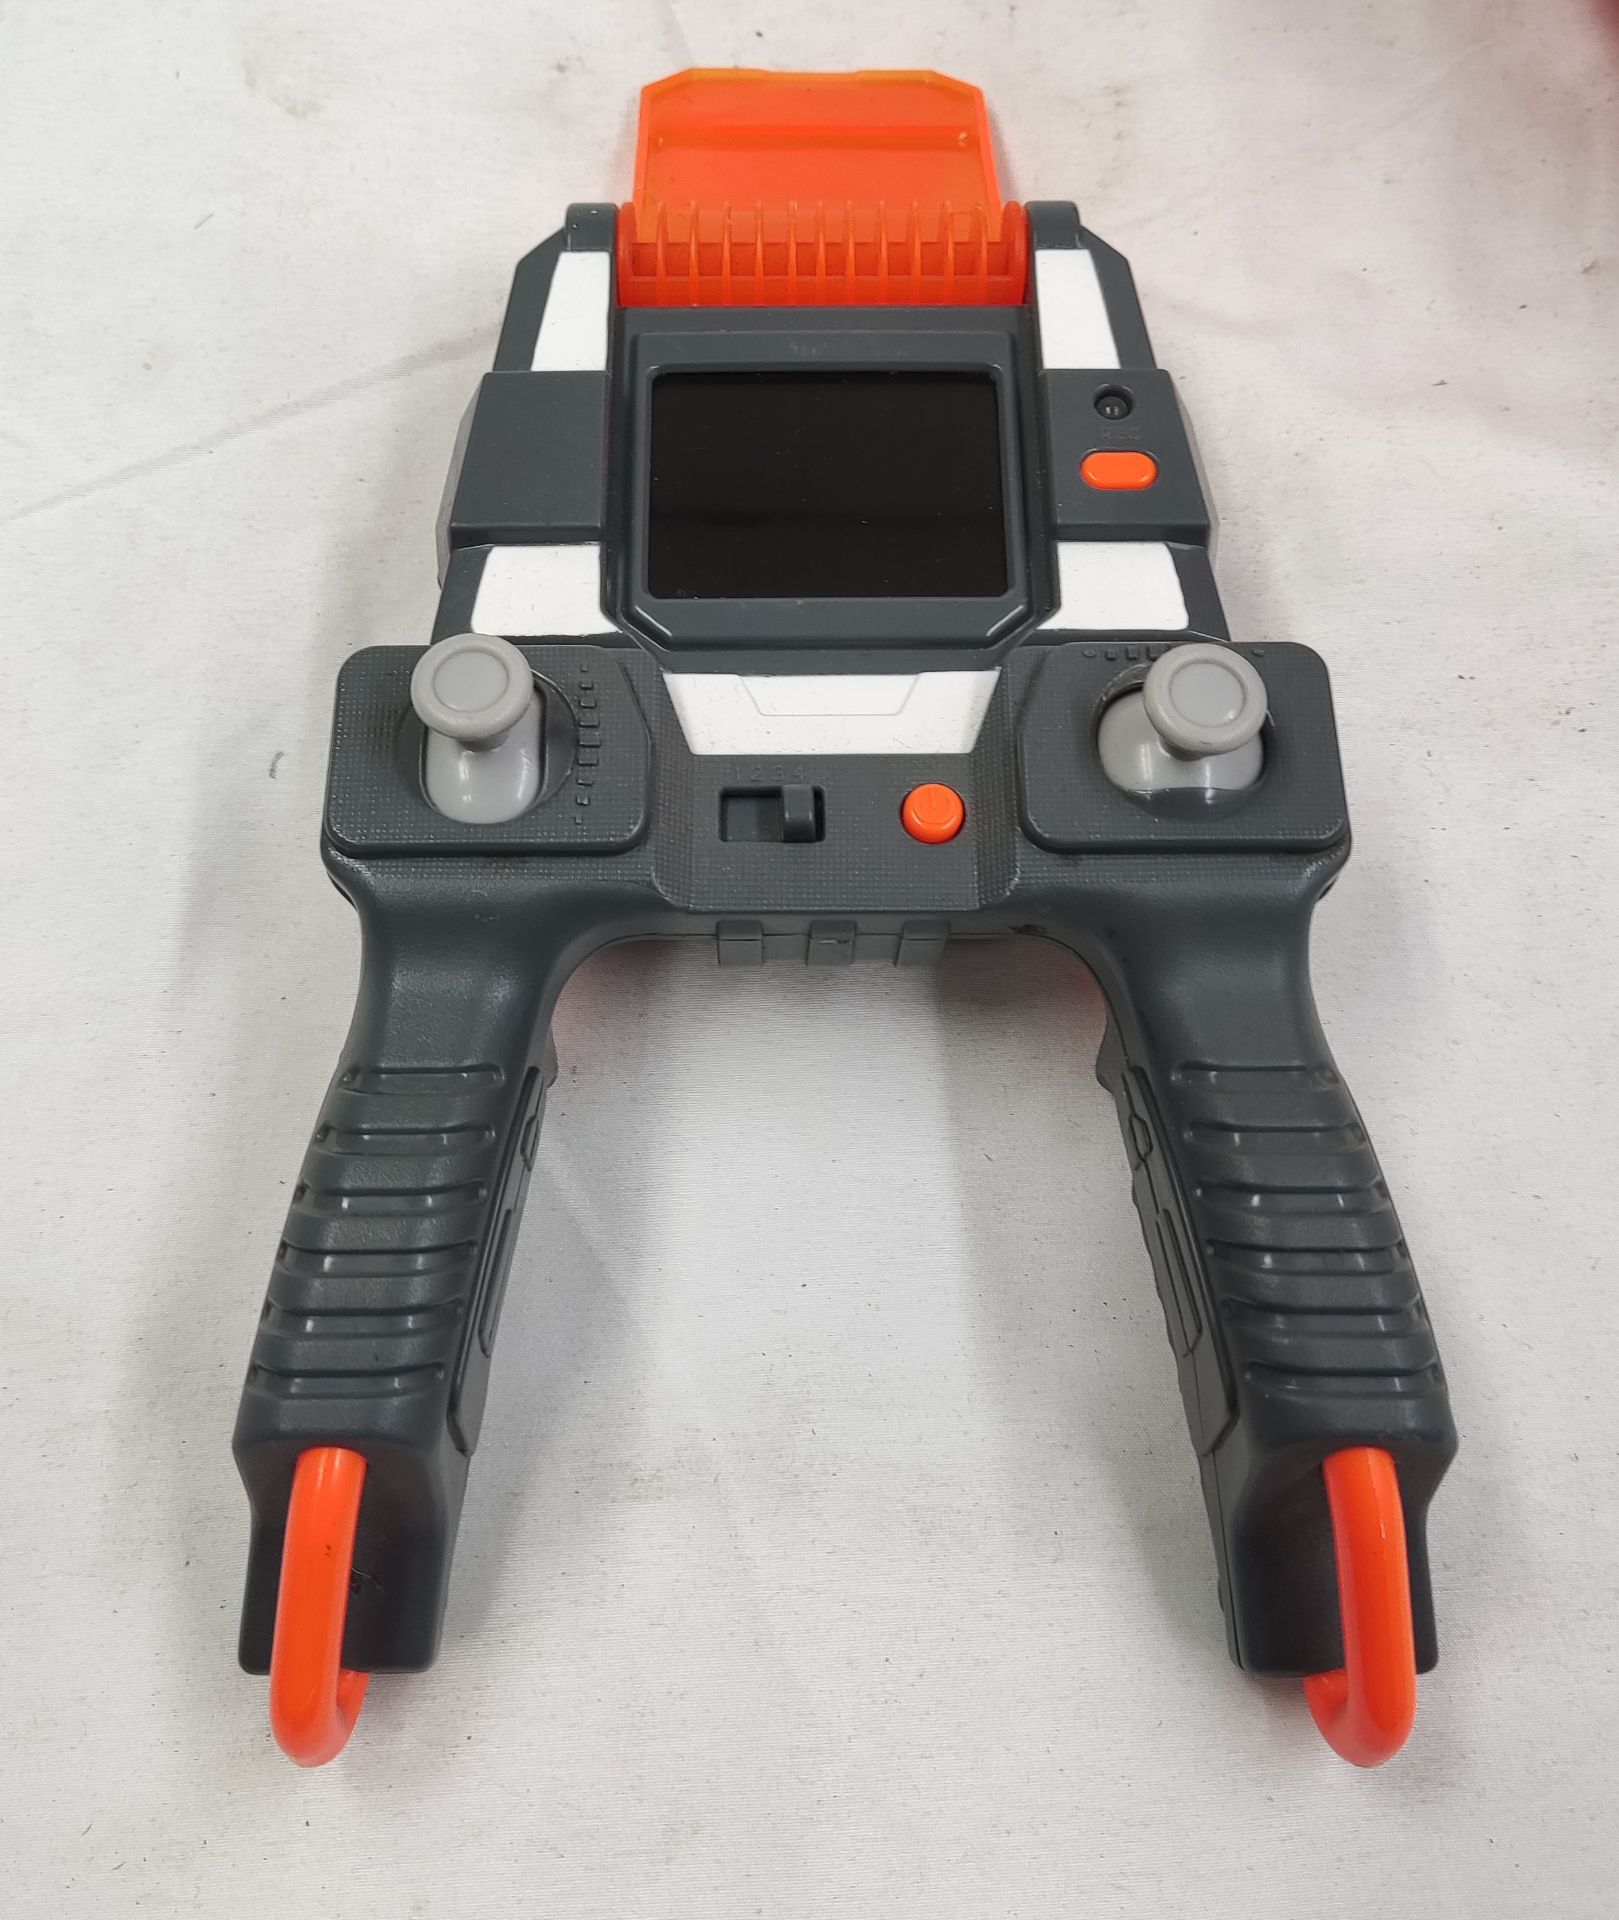 1 x Nerf Terrascout Remote Control Nerf Tank With Video - Used - CL444 - NO VAT ON THE HAMMER - - Image 12 of 14